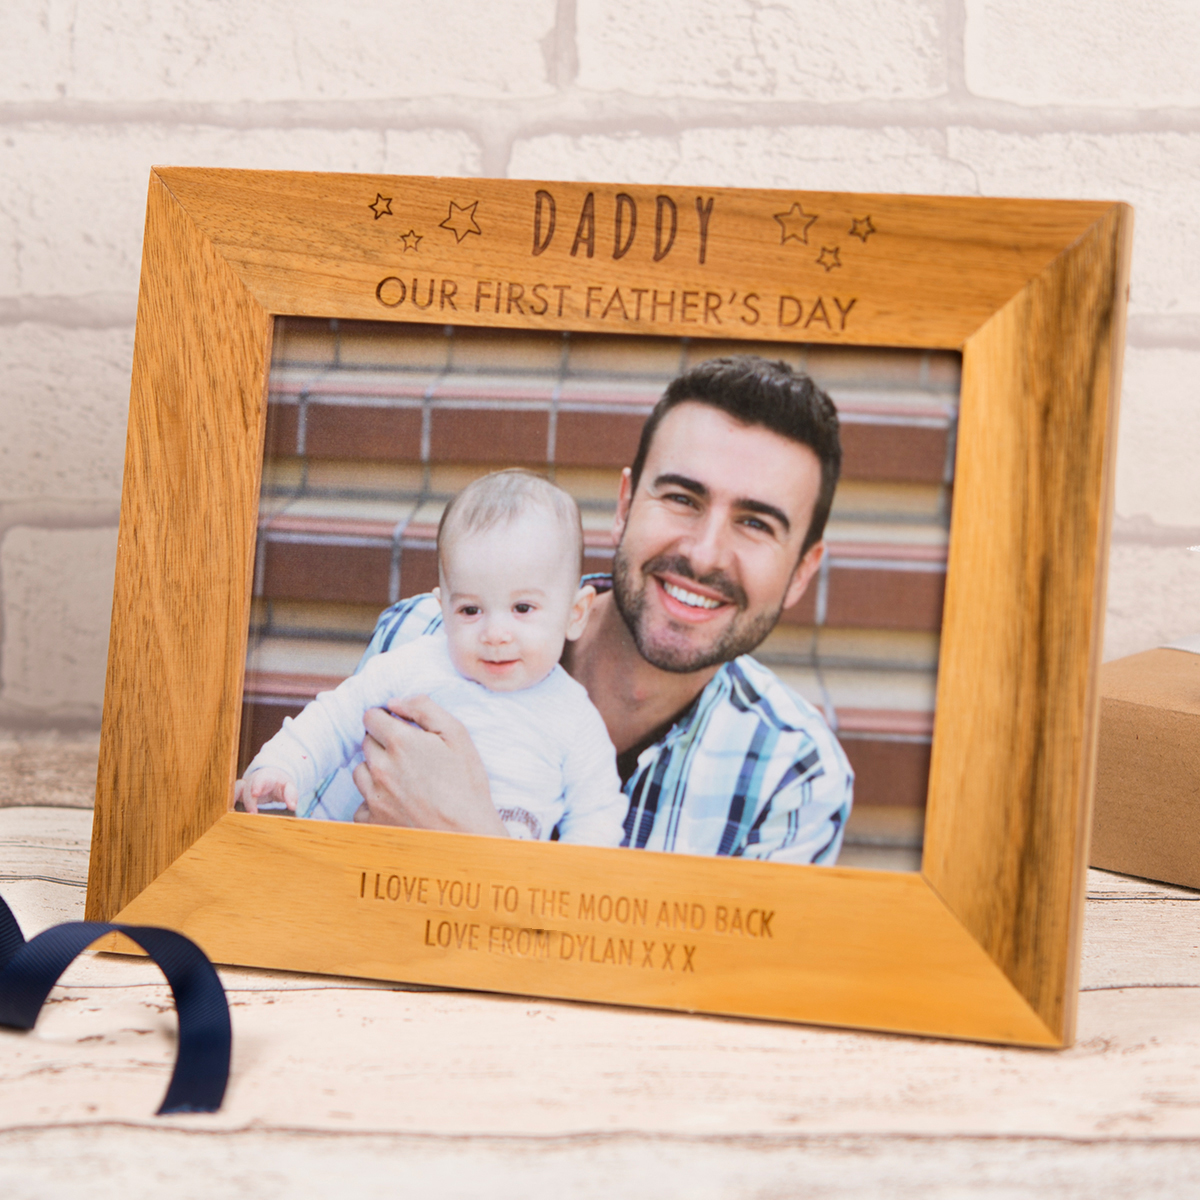 Personalised Engraved Wooden Picture Frame - Our First Father's Day